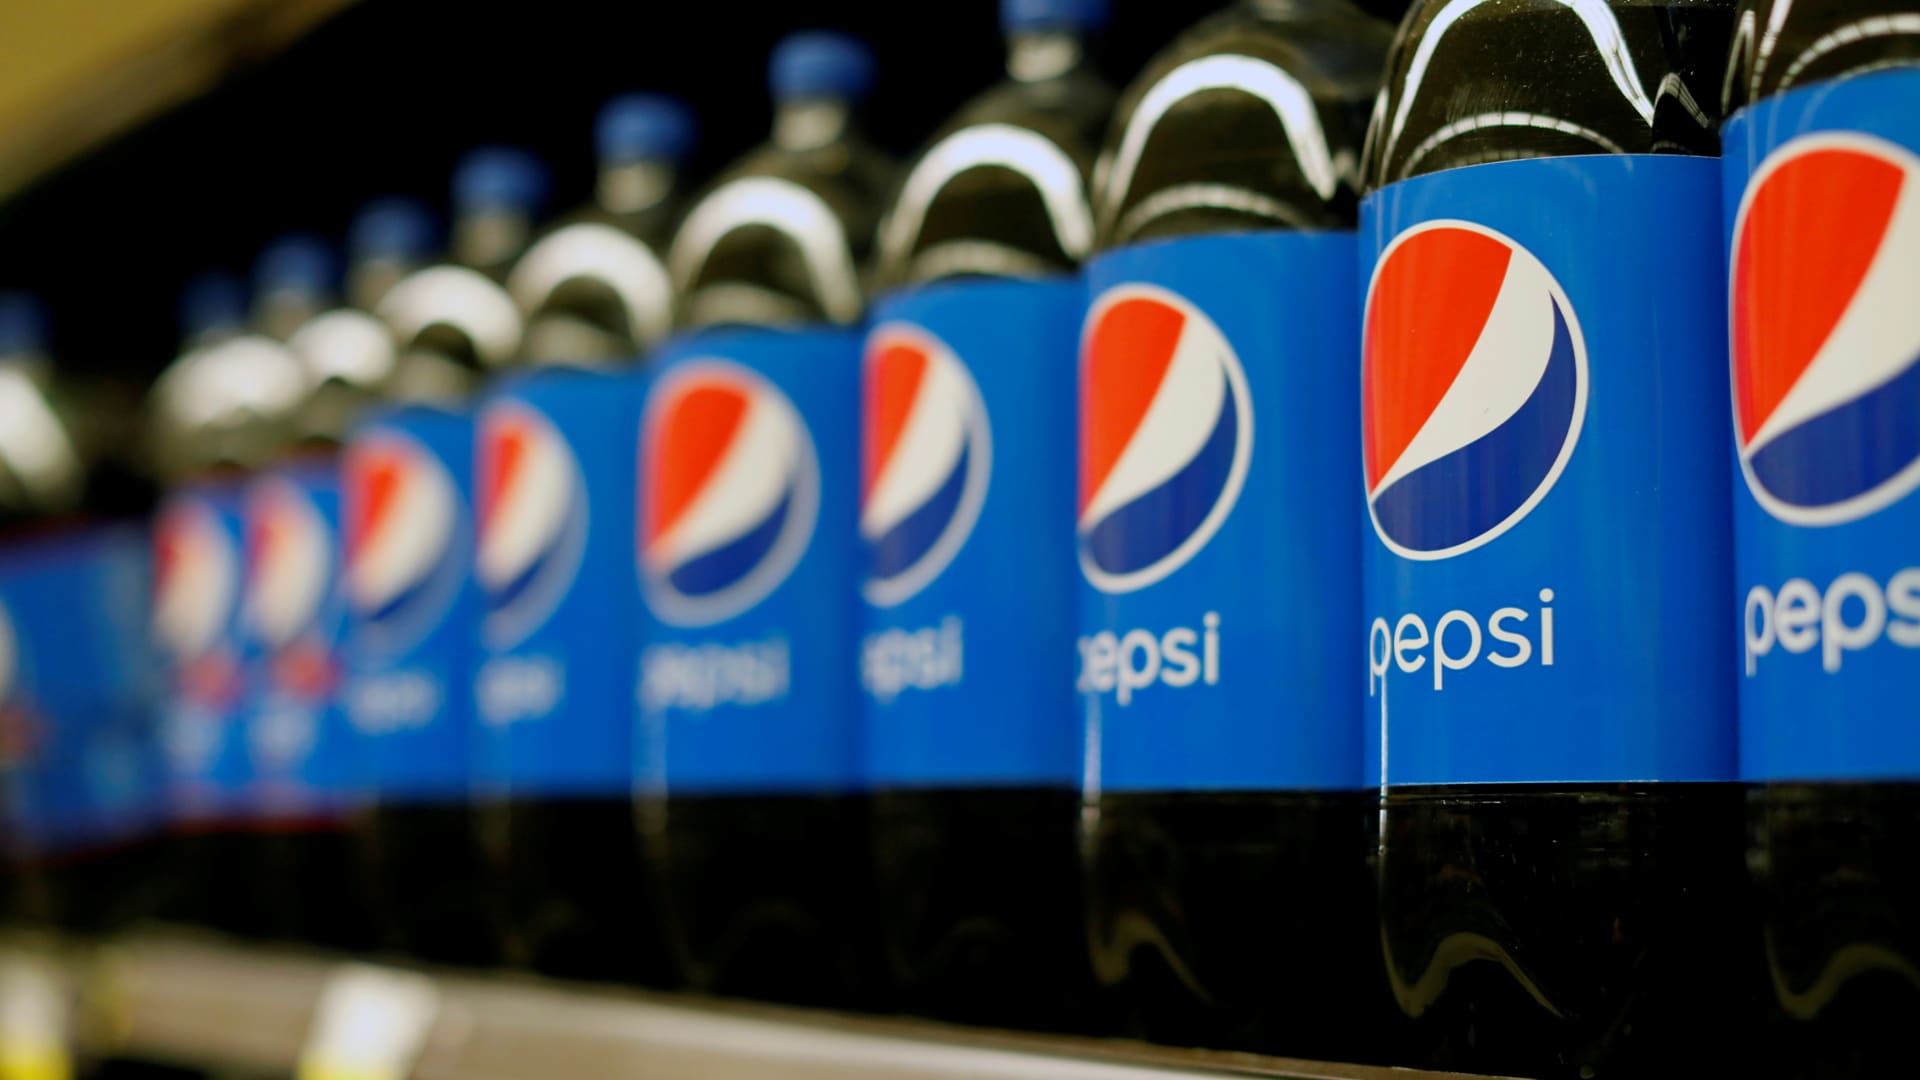 PepsiCo, General Electric, UPS and others